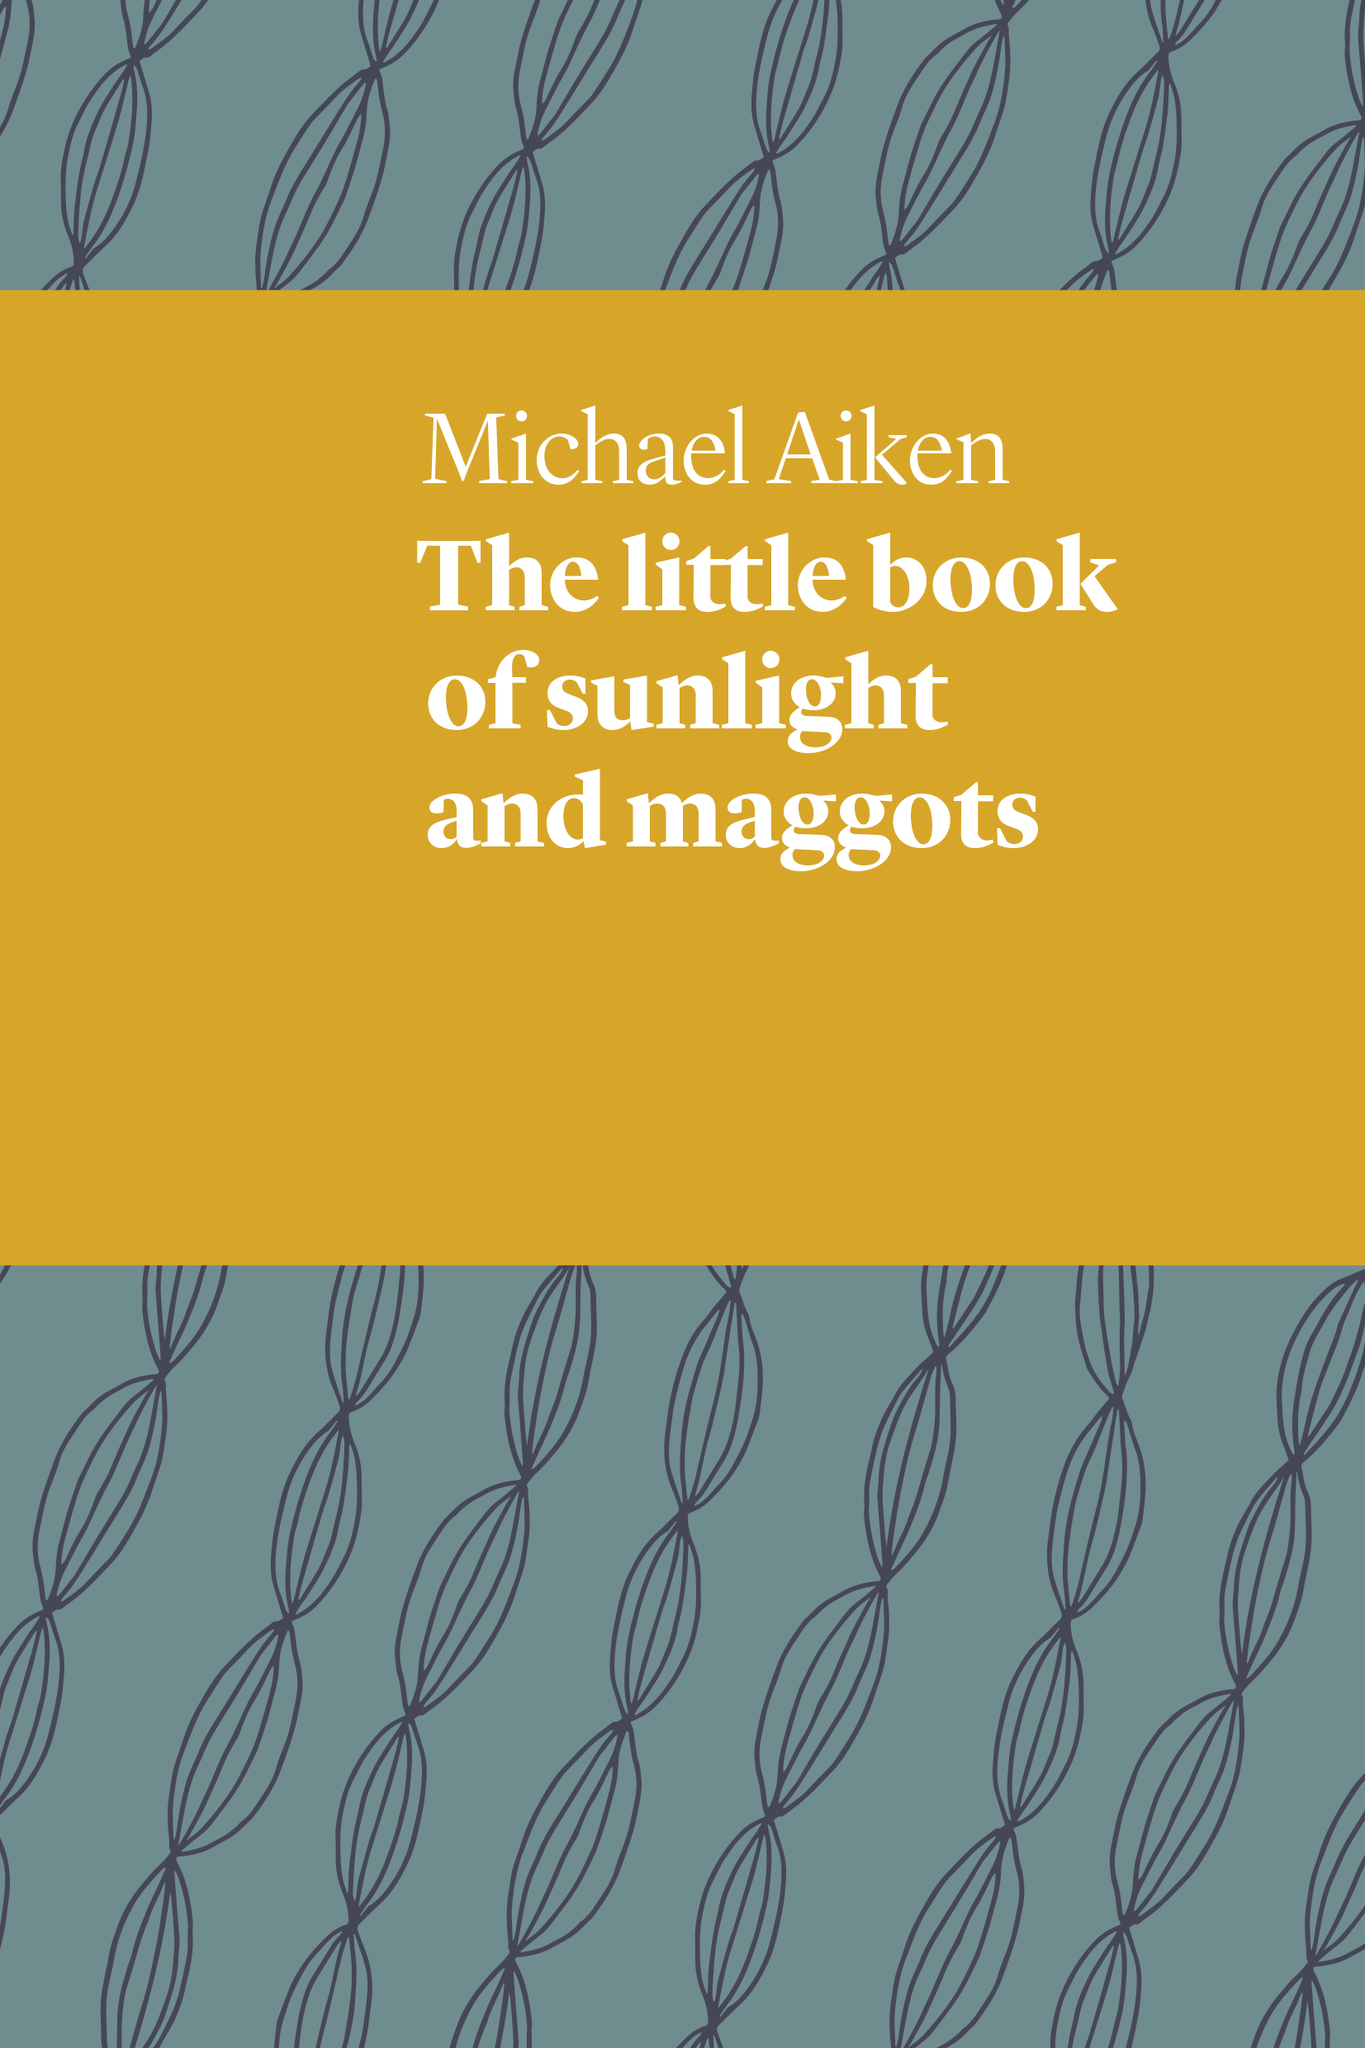 The Little Book of Sunlight and Maggots